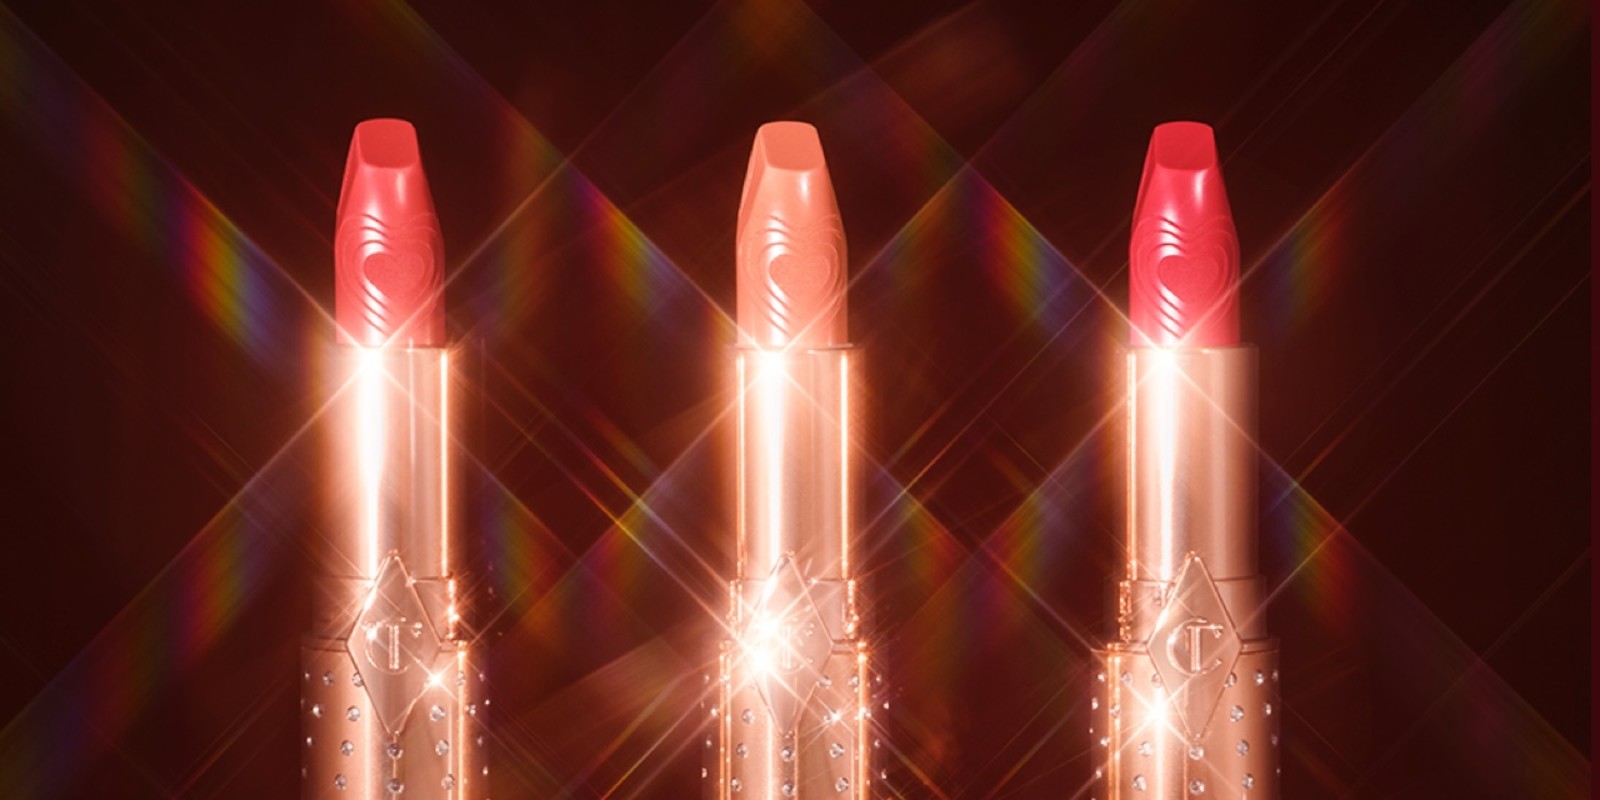 Three open lipsticks in shades of nude pink, gold peach, and bright pink in gold-coloured tubes with sparkles all over.